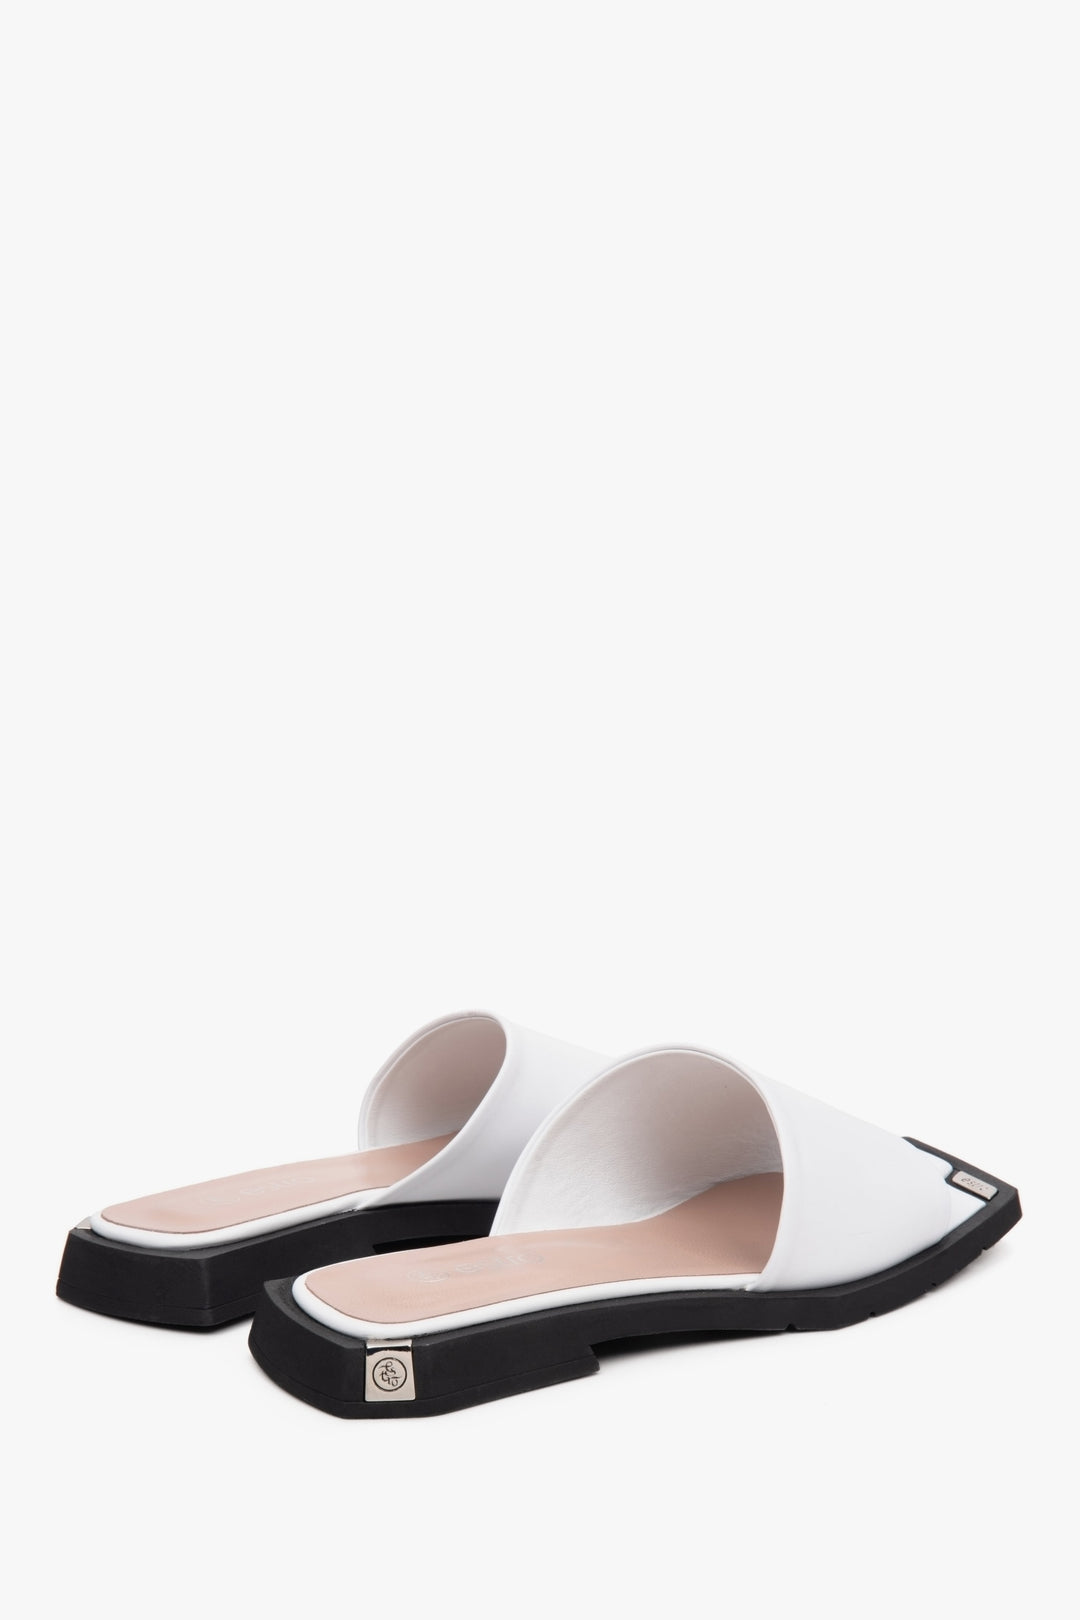 Women's leather mules for summer in white - presentation of the back of the model.